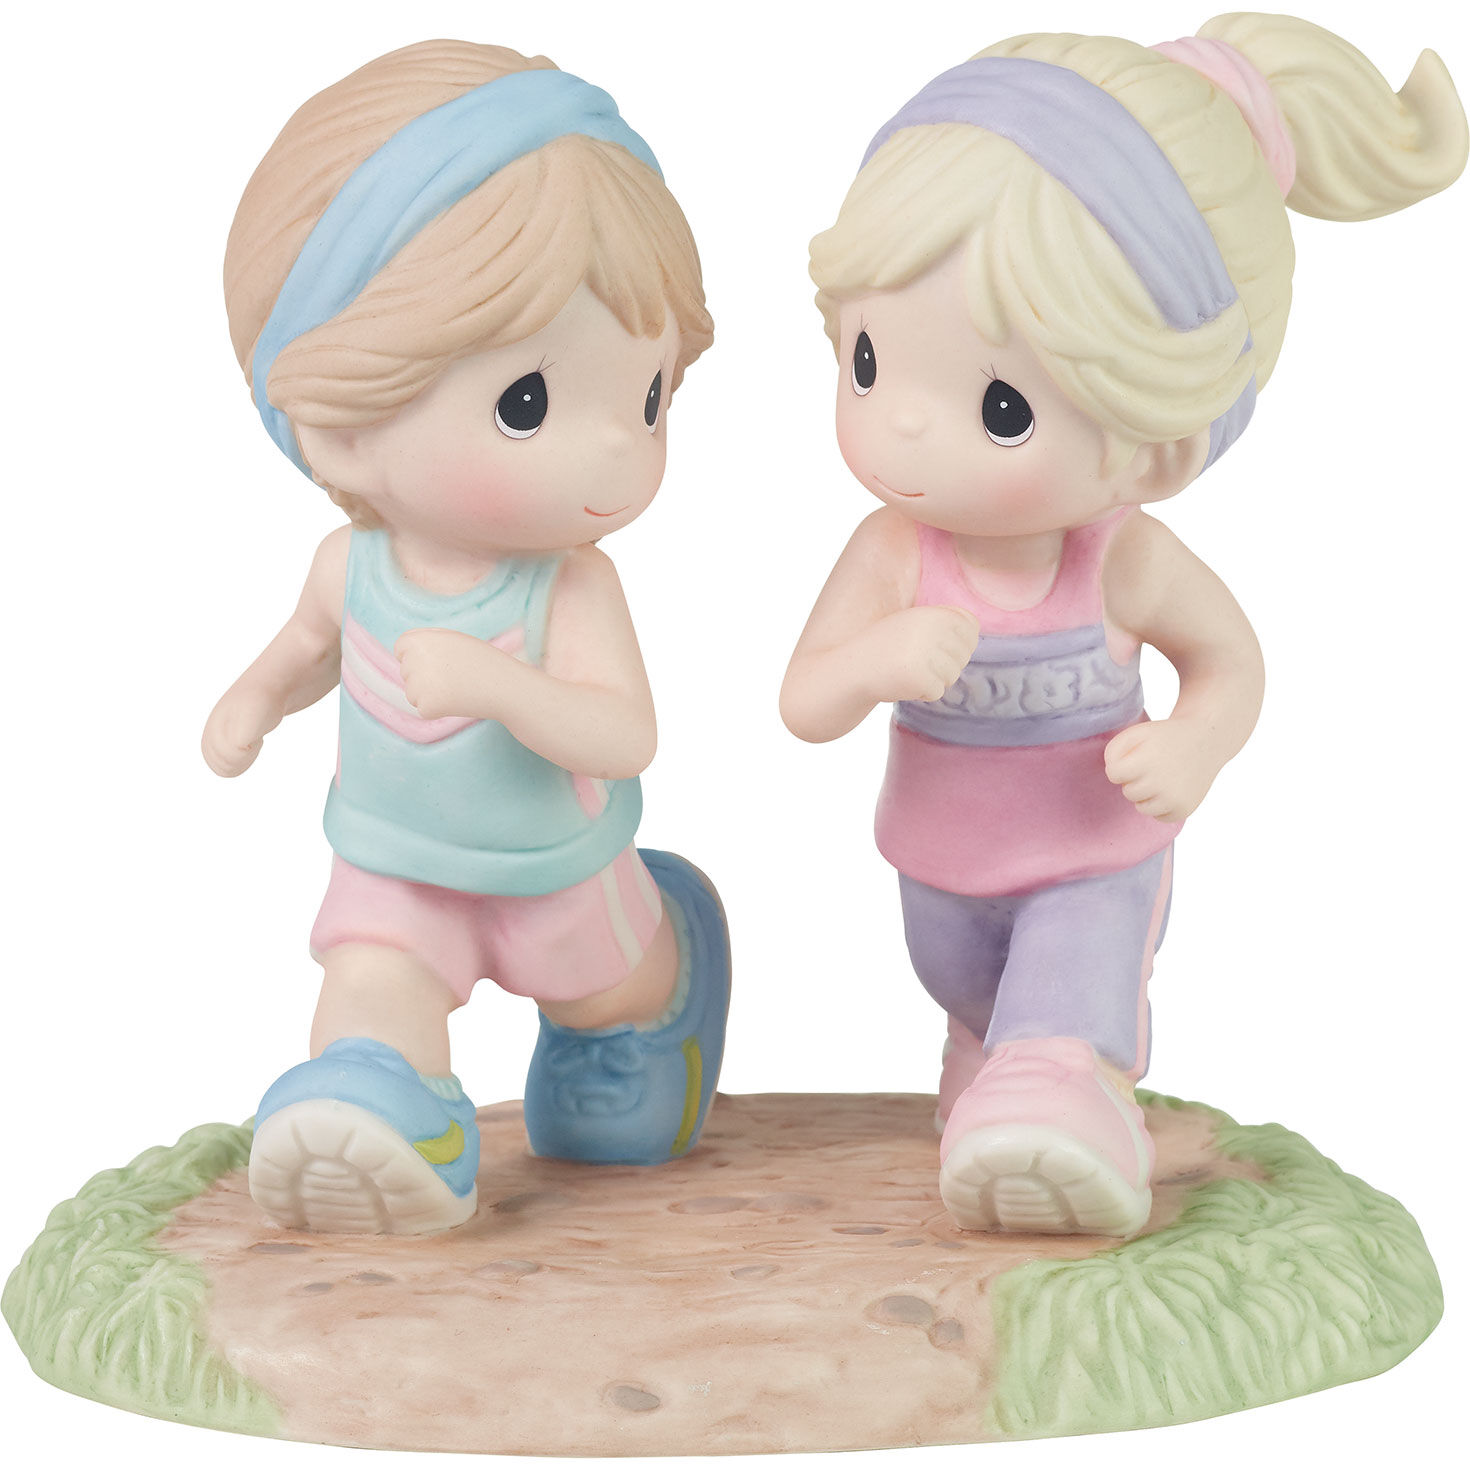 Precious Moments Find Your Happy Pace Figurine, 5.1" for only USD 64.99 | Hallmark